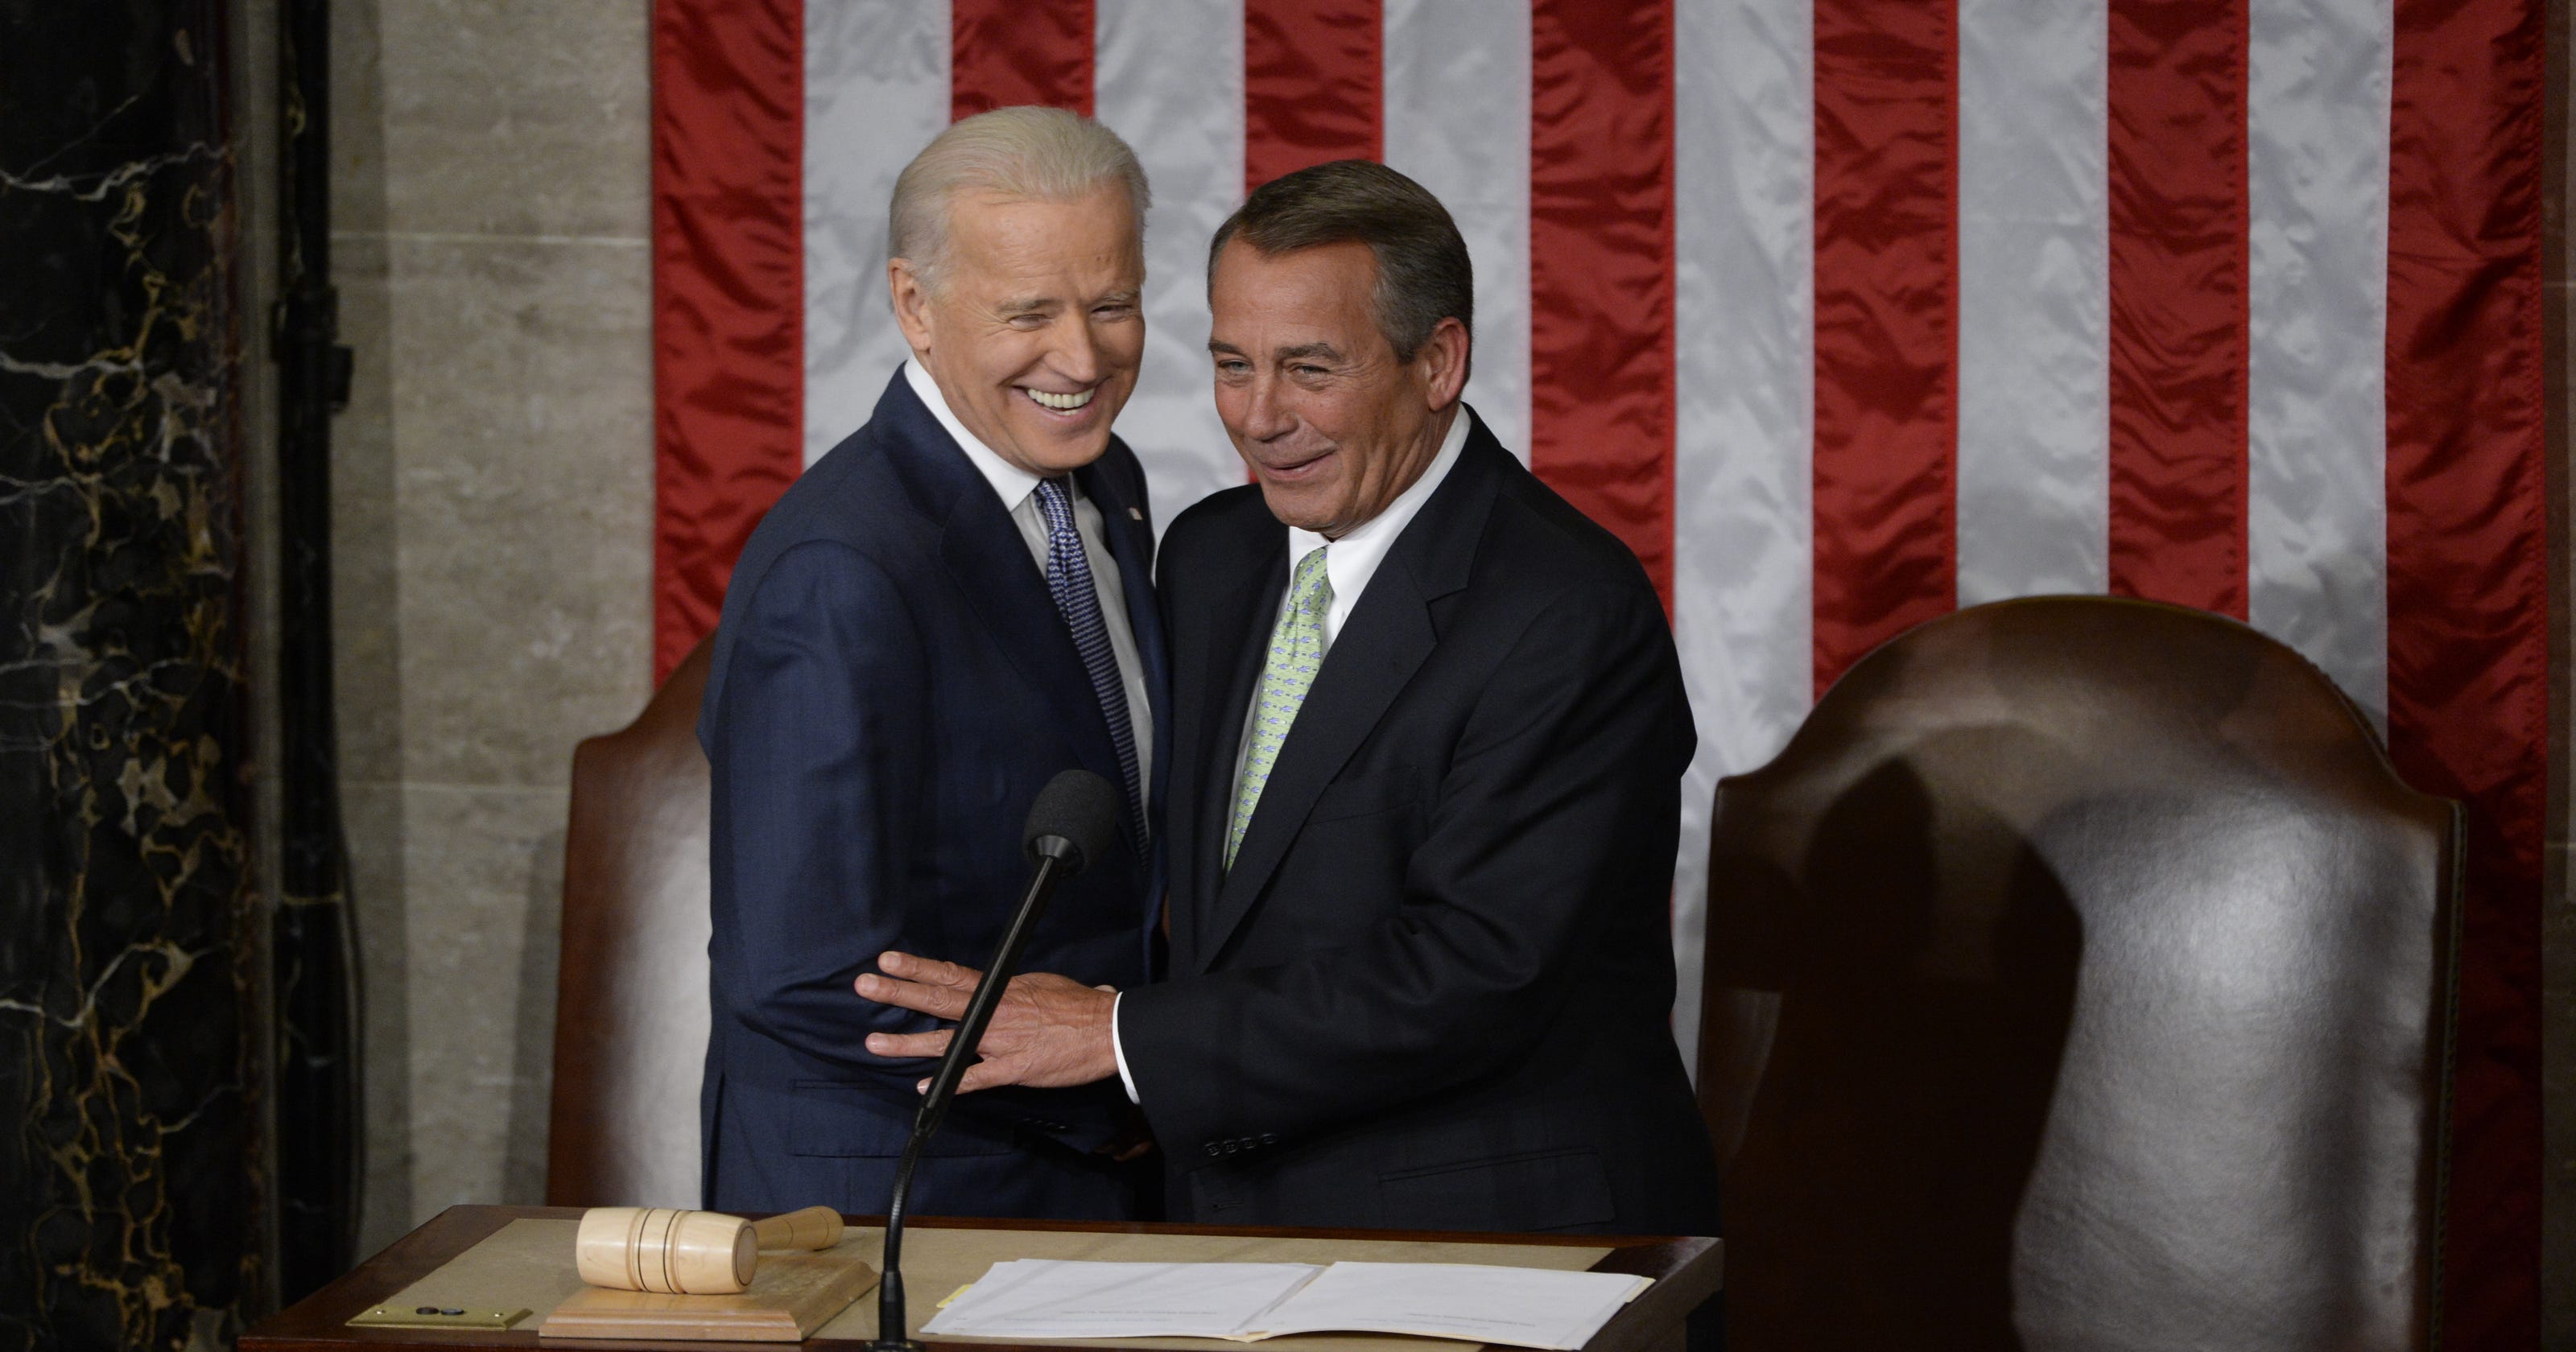 Biden being Biden at the State of the Union